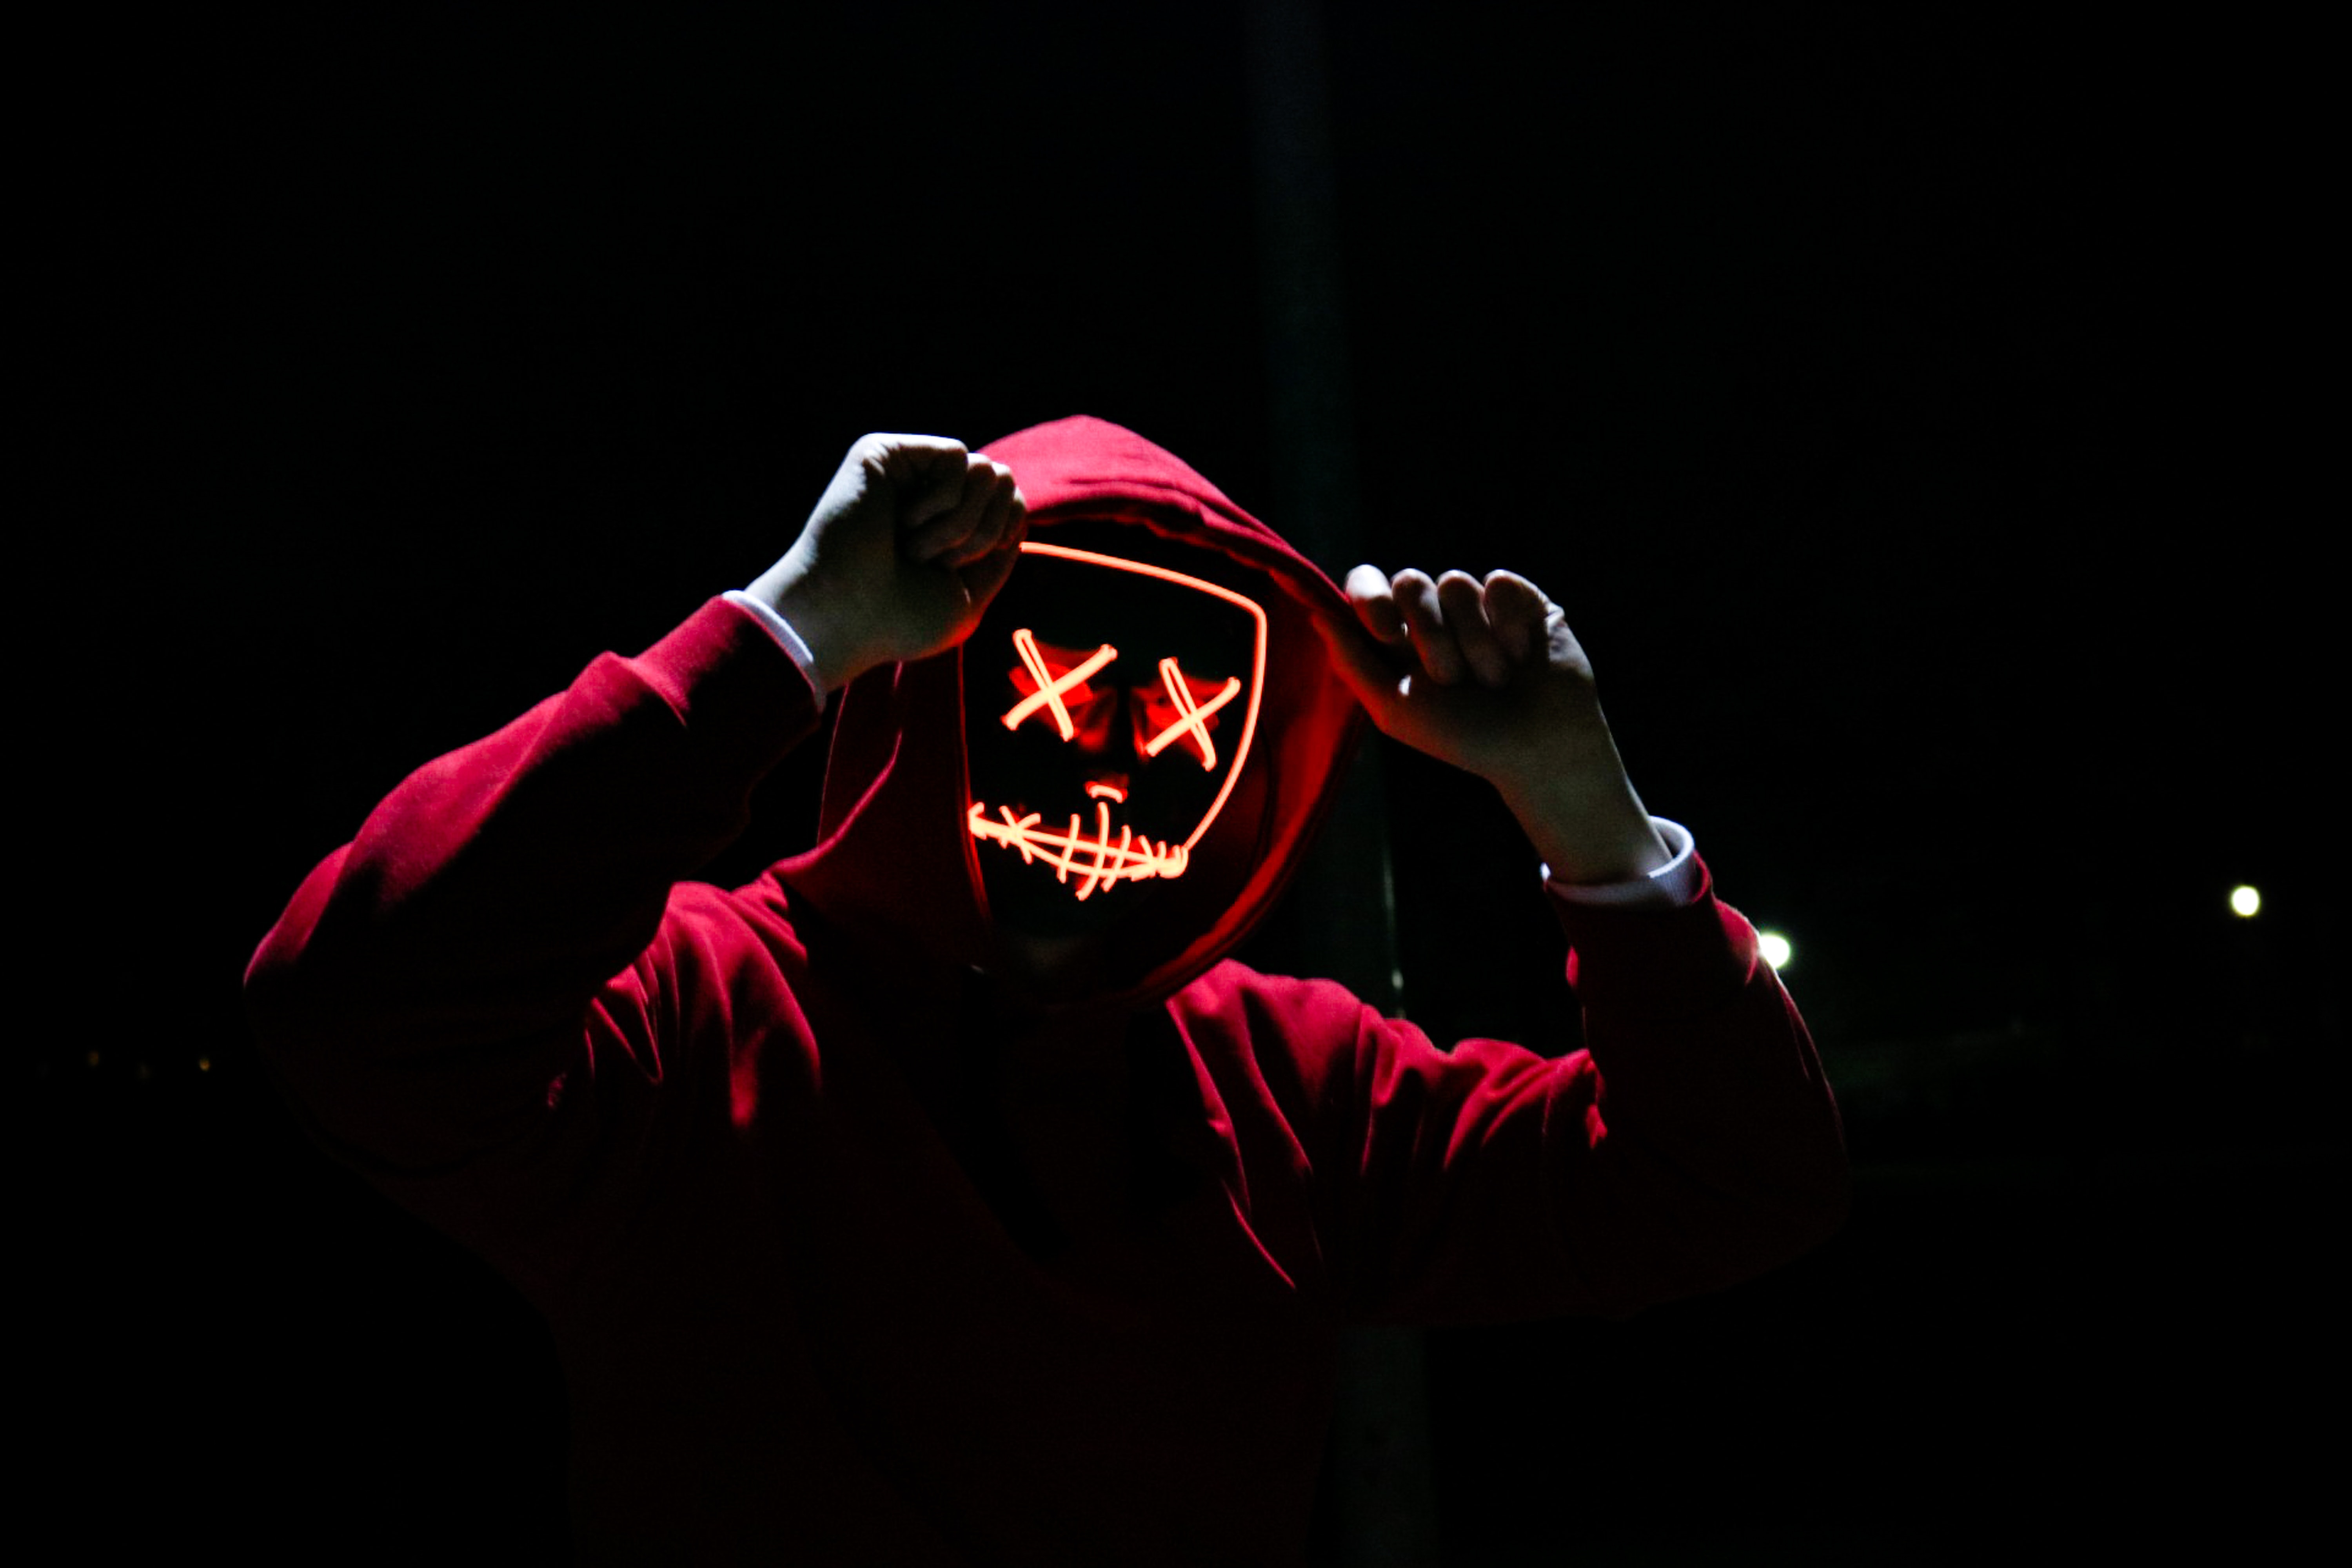 person-wearing-red-hoodie-1097456